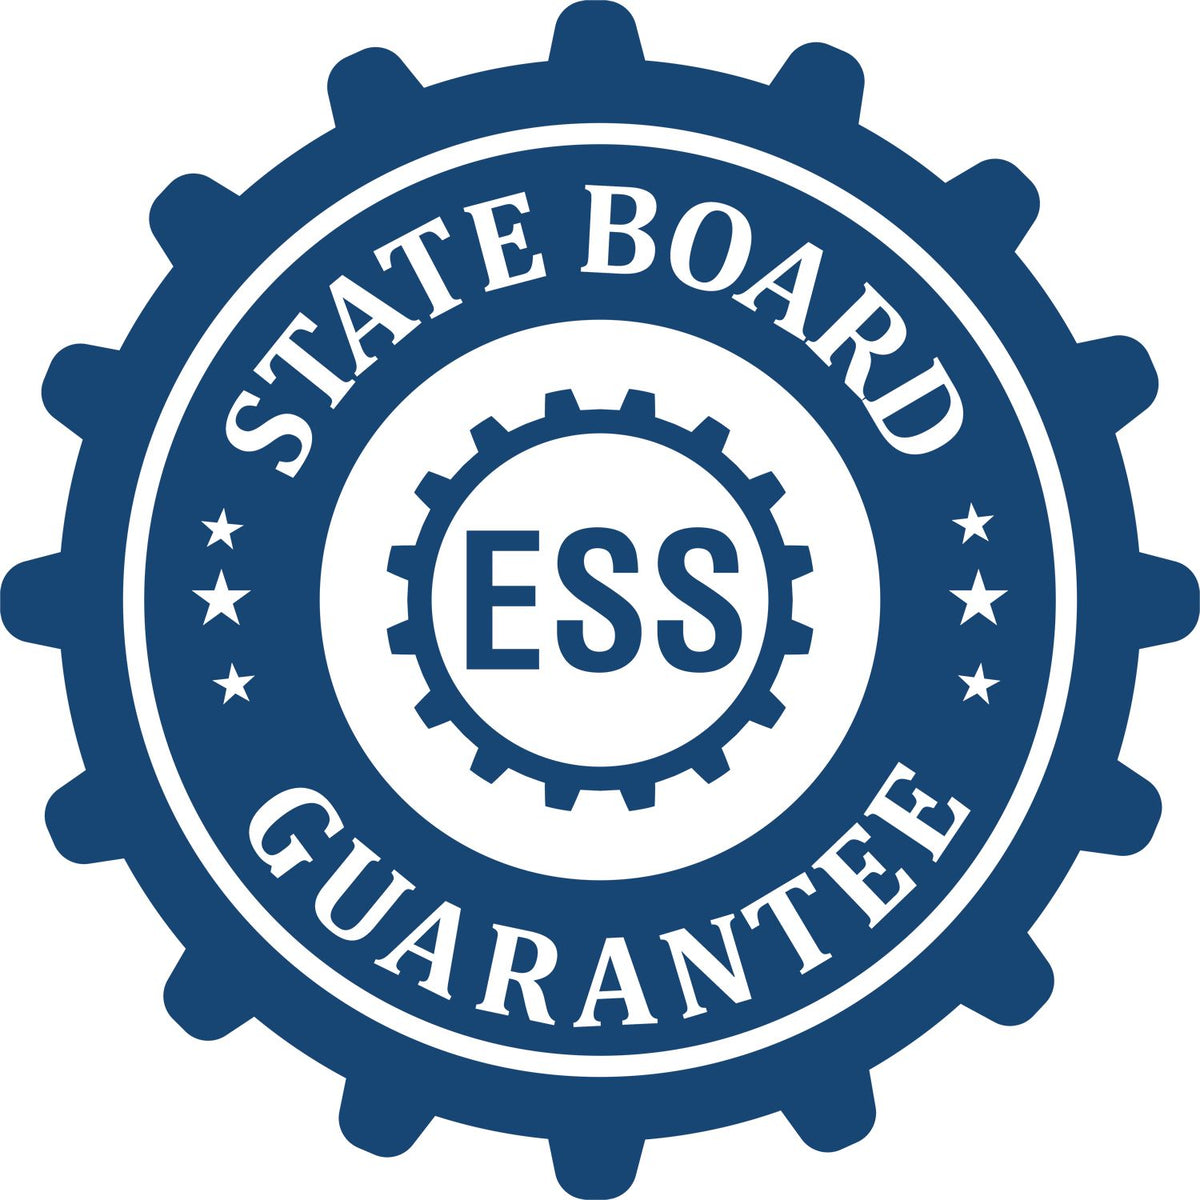 An emblem in a gear shape illustrating a state board guarantee for the Premium MaxLight Pre-Inked Colorado Engineering Stamp product.